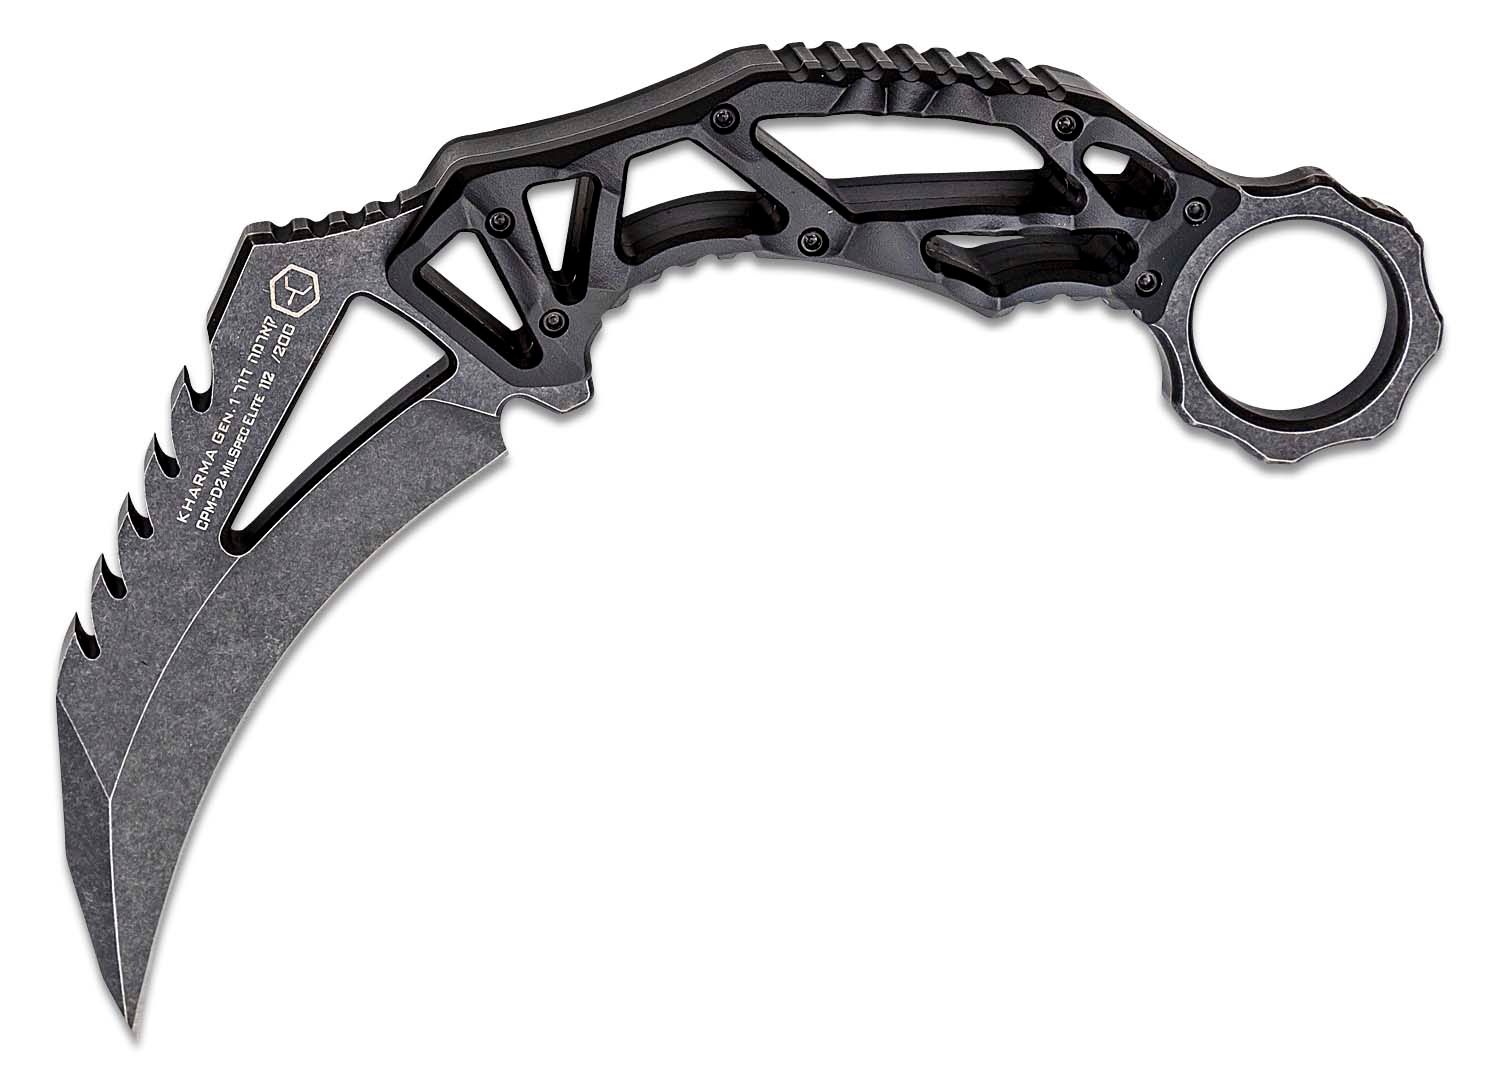 A skin collector bought a rare Karambit knife for $124,000 - only